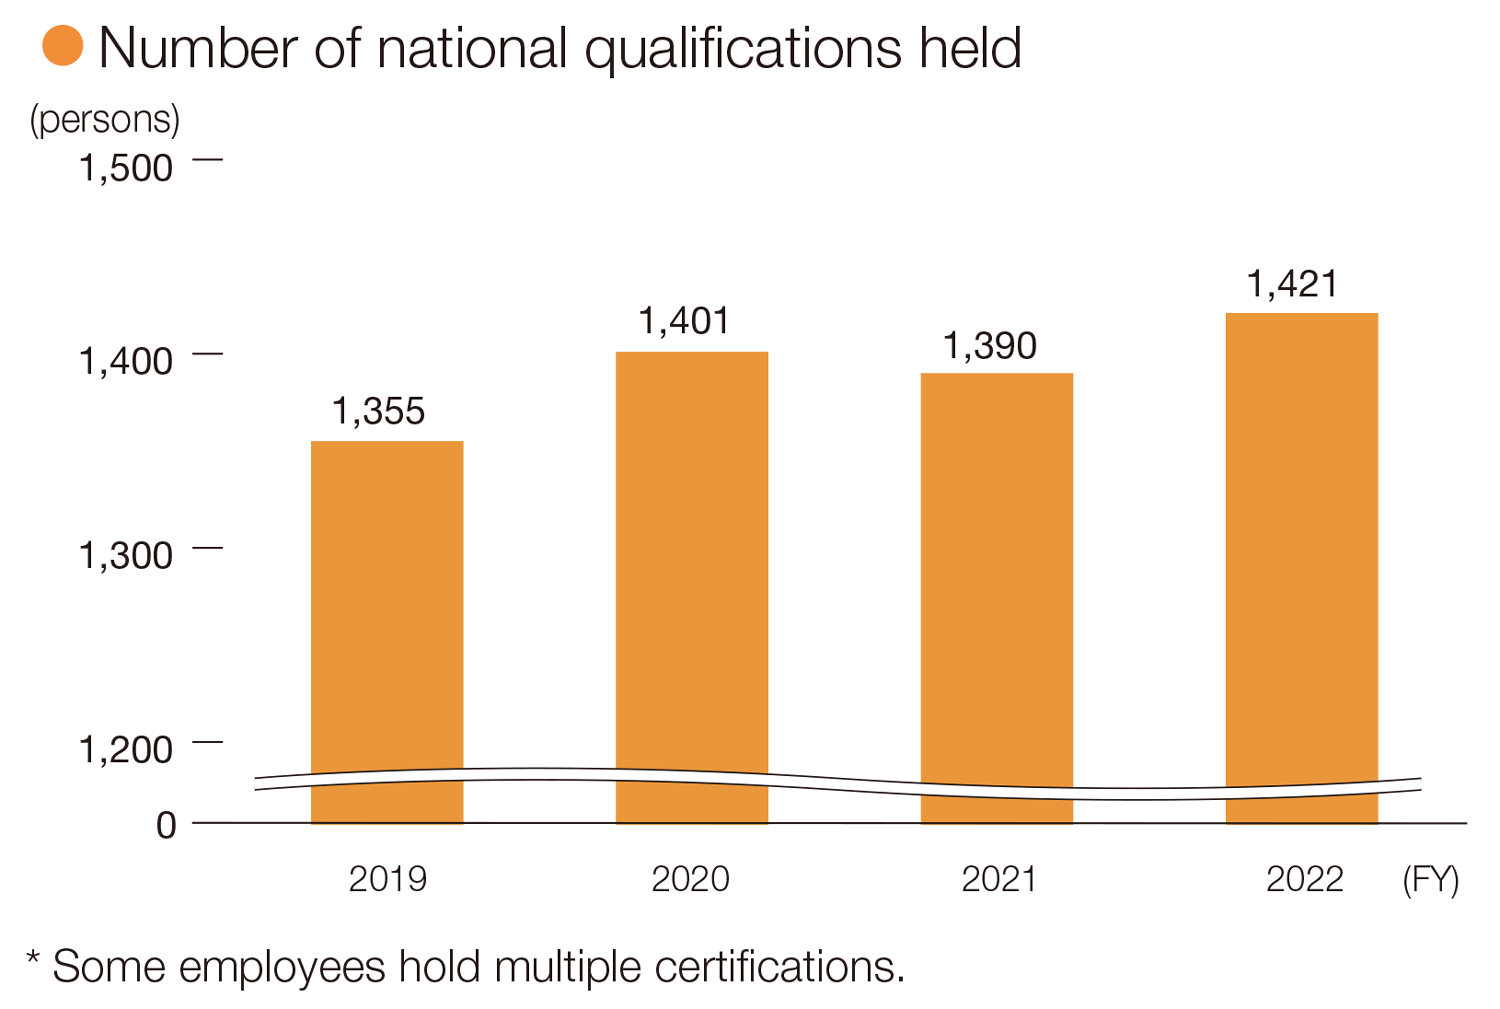 Number of national qualifications held